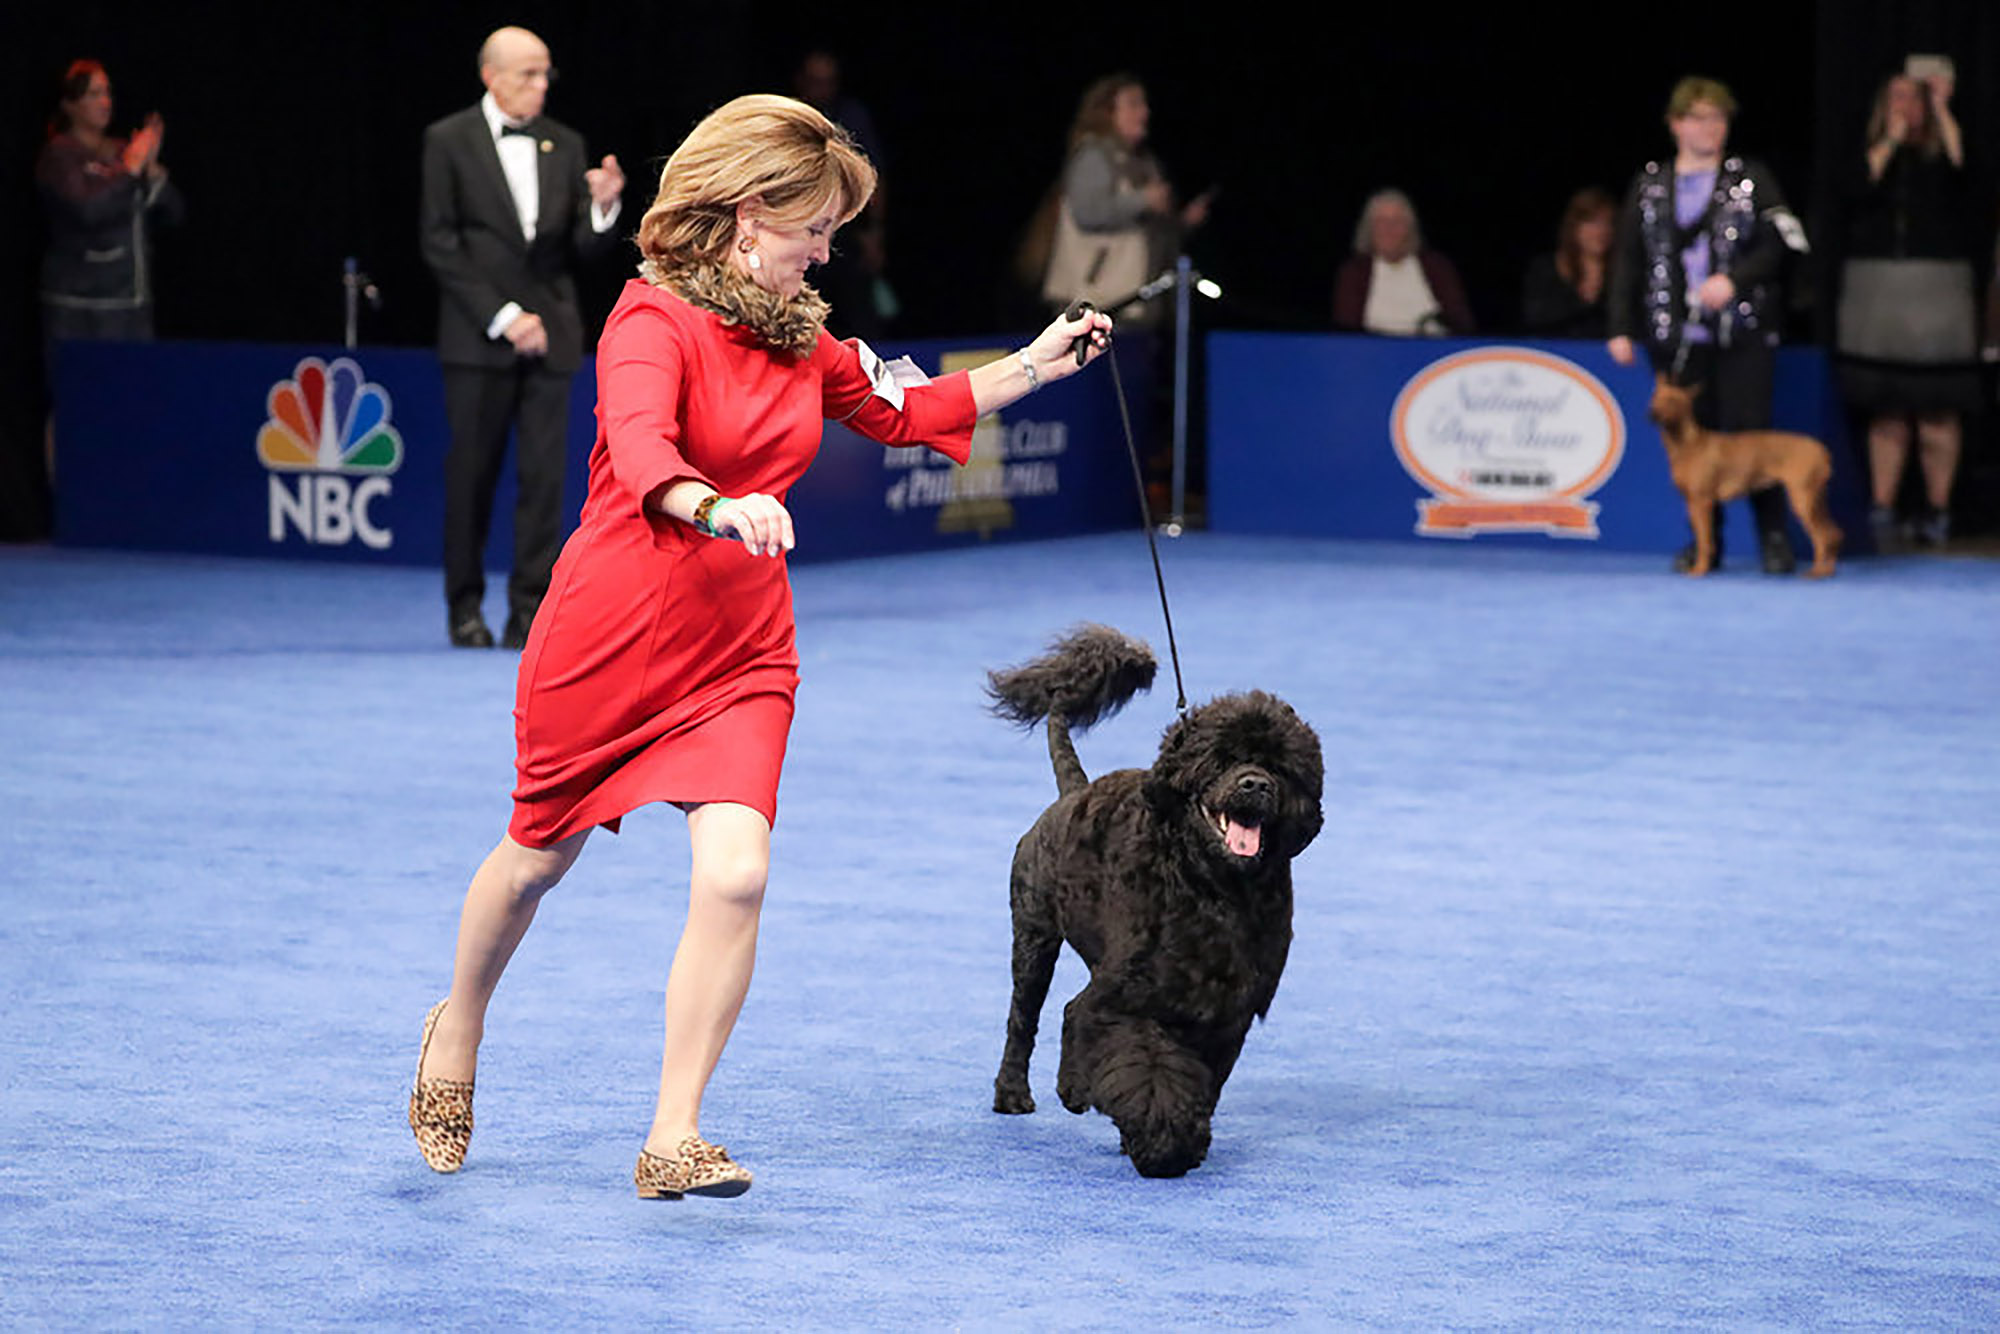 The Portuguese Water Dog running with its owner.